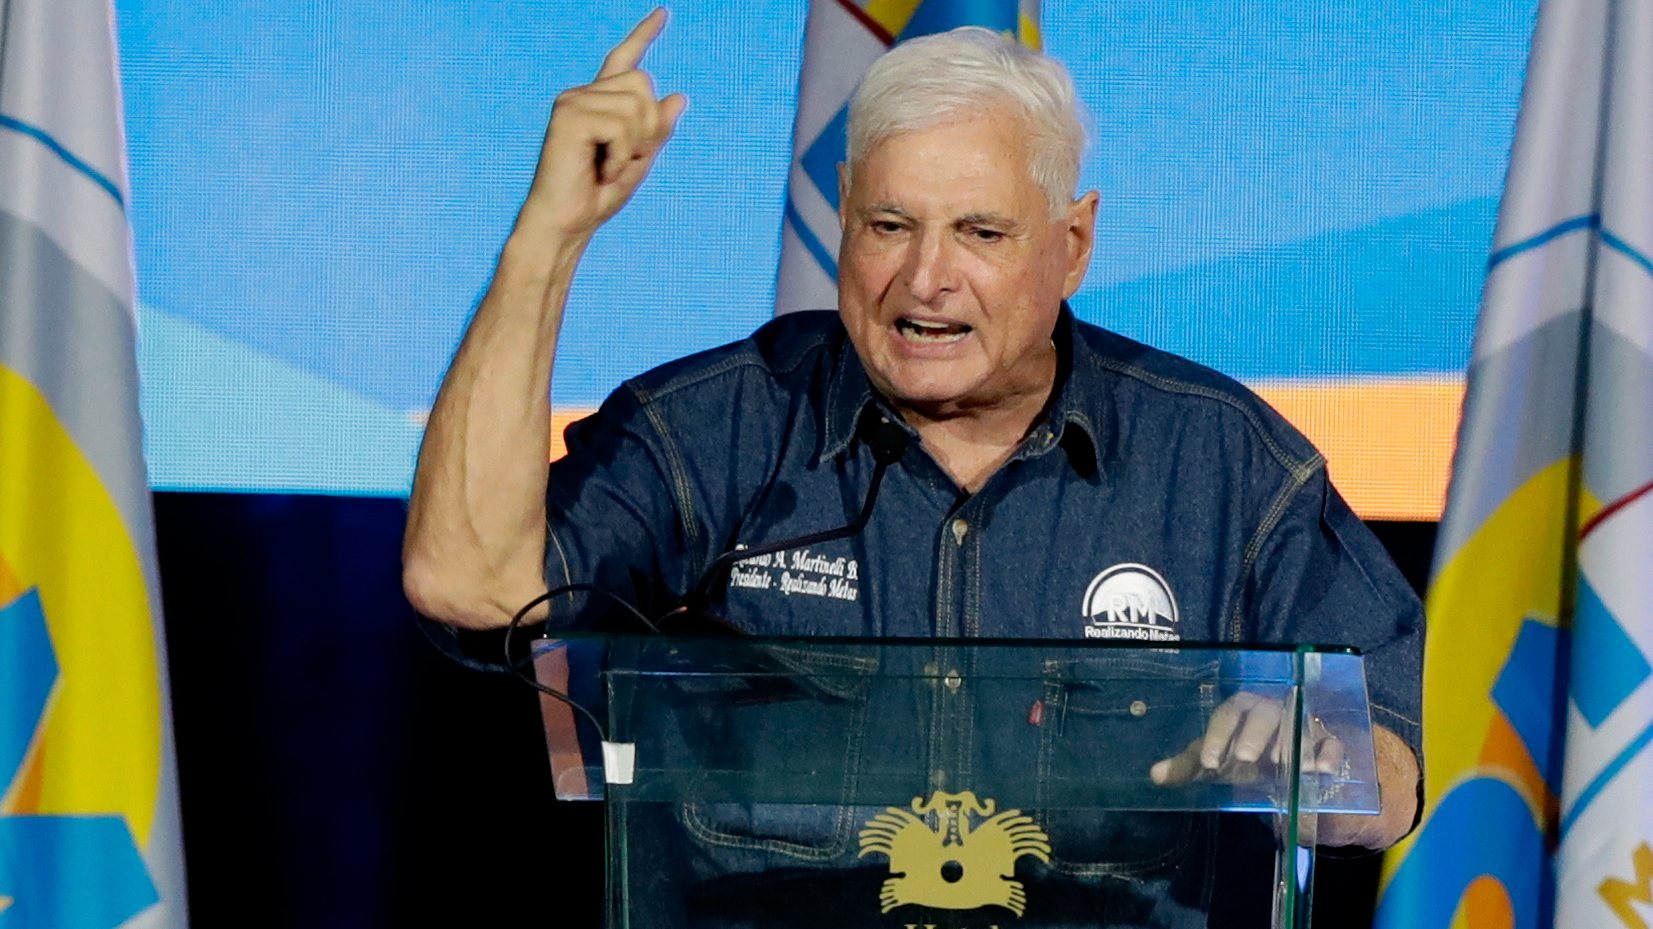 epa10753887 (FILE) Former Panamanian President Ricardo Martinelli speaks after winning in the primaries of the Realizing Goals (RM) party for the 2024 presidential elections, in Panama City, Panama, 04 June 2023 (reissued 18 July 2023). Martinelli was found guilty of the crime of money laundering for the purchase of a media publisher and faces a sentence of between 5 and 12 years in prison, according to the conviction released on 18 July by the Panamanian Judiciary. The ruling of the liquidating judge of Criminal Cases Baloisa Marquinez indicates that Martinelli was also imposed &#039;a fine equivalent to 19,221,600.48 dollars as an accessory penalty&#039; for the case known as &#039;New Business&#039;.  EPA/BIENVENIDO VELASCO (FILE)  EDITORIAL USE ONLY